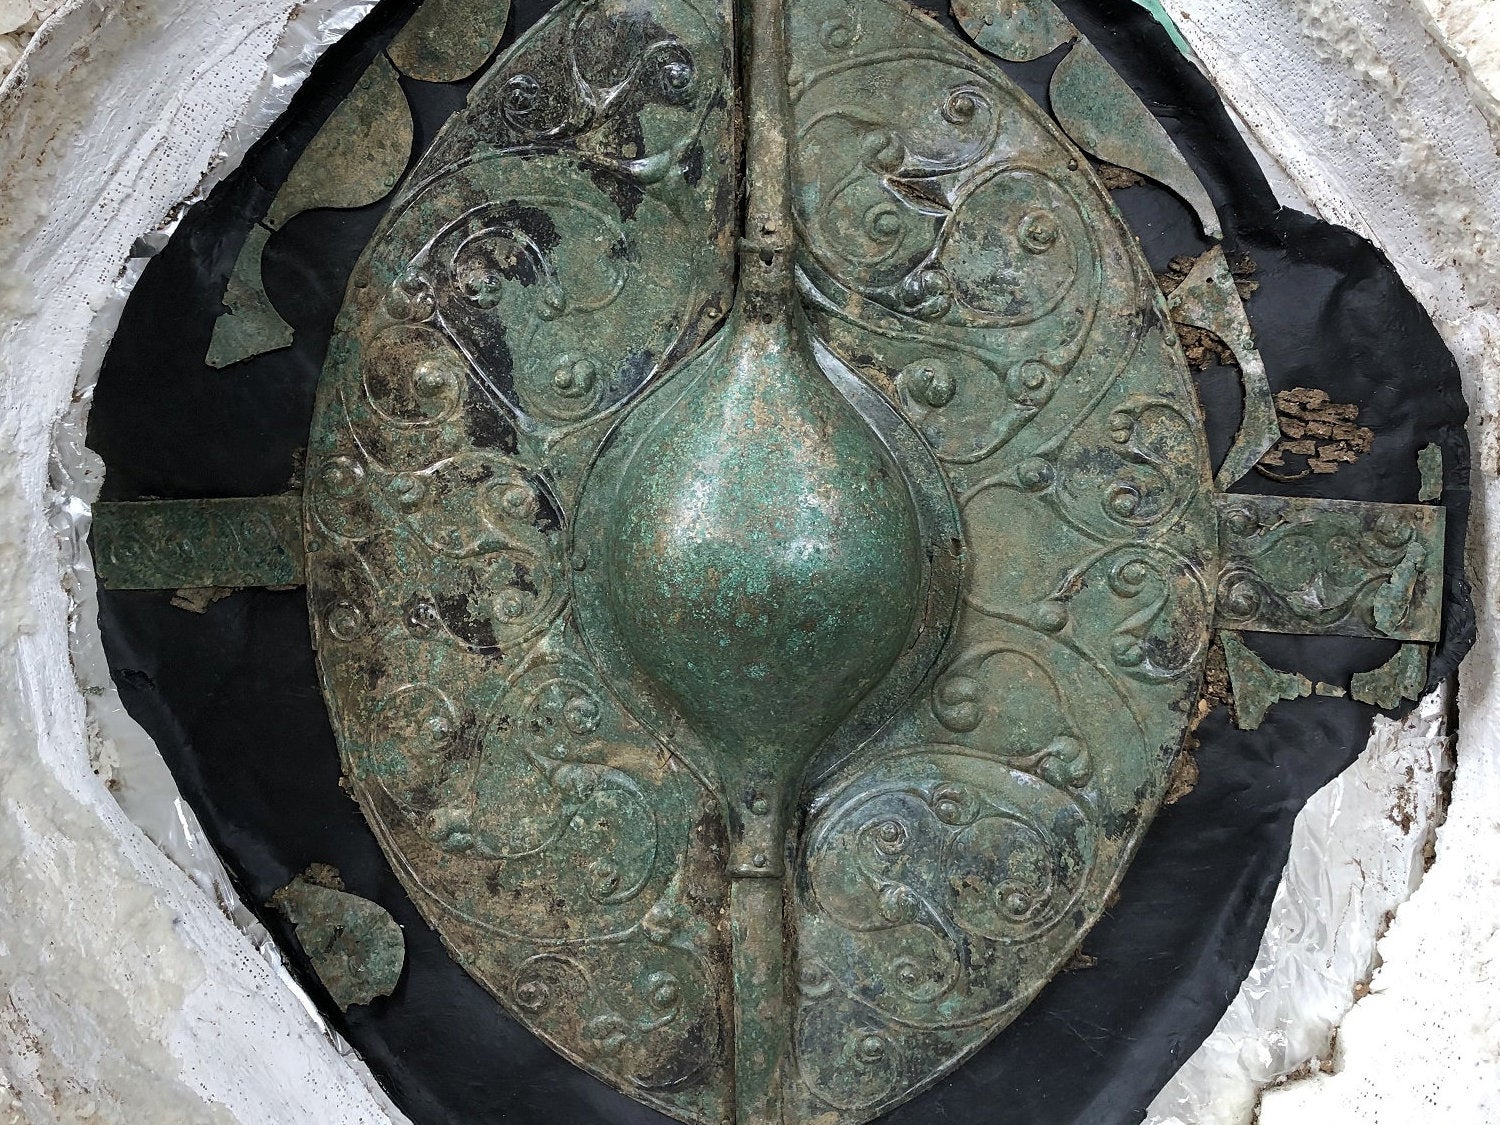 The 2000-year old shield has been hailed as “the most important British Celtic art object of the millennium”